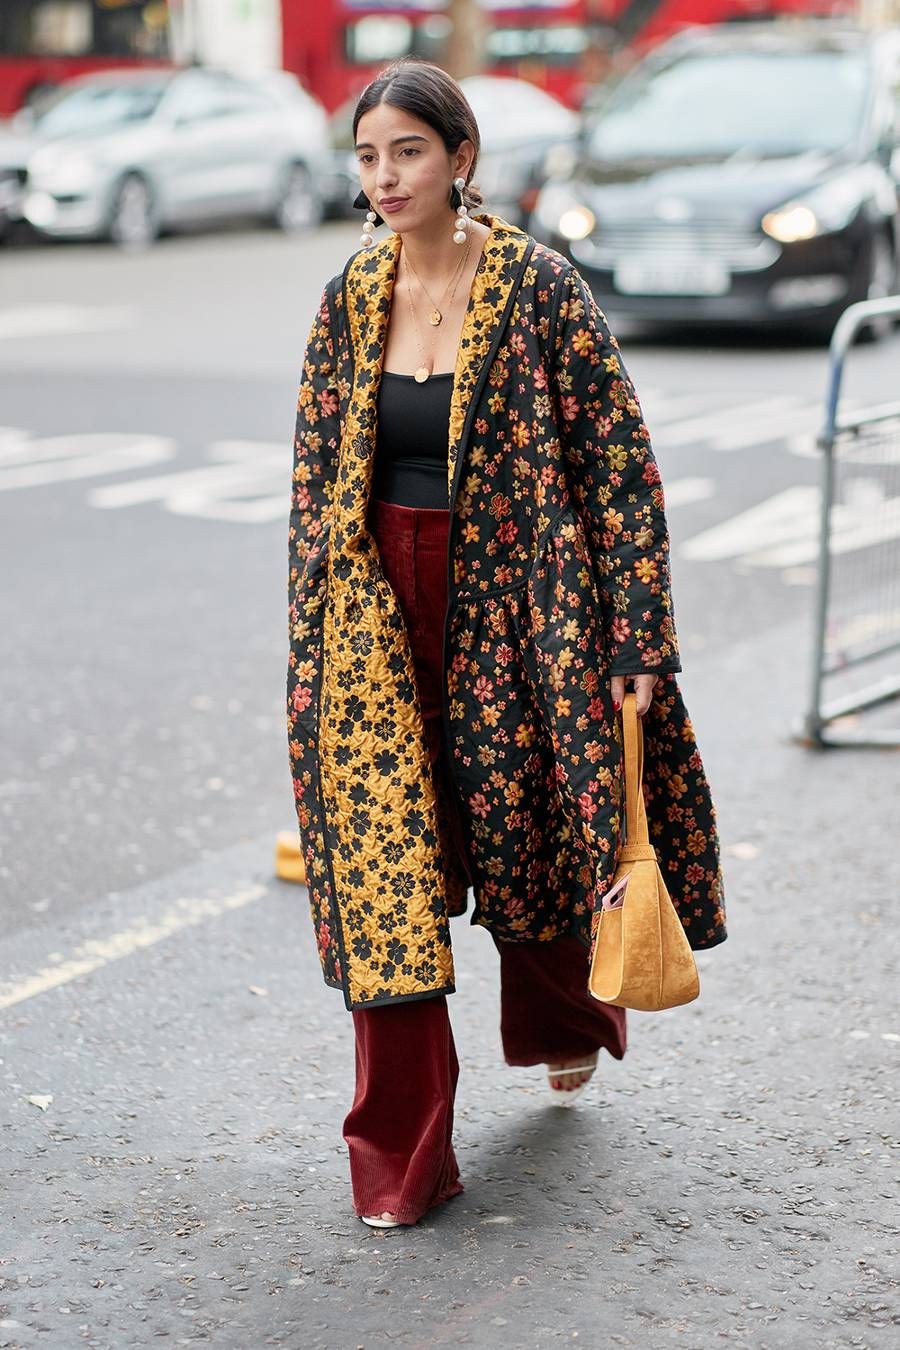 The Latest Street Style From London Fashion Week